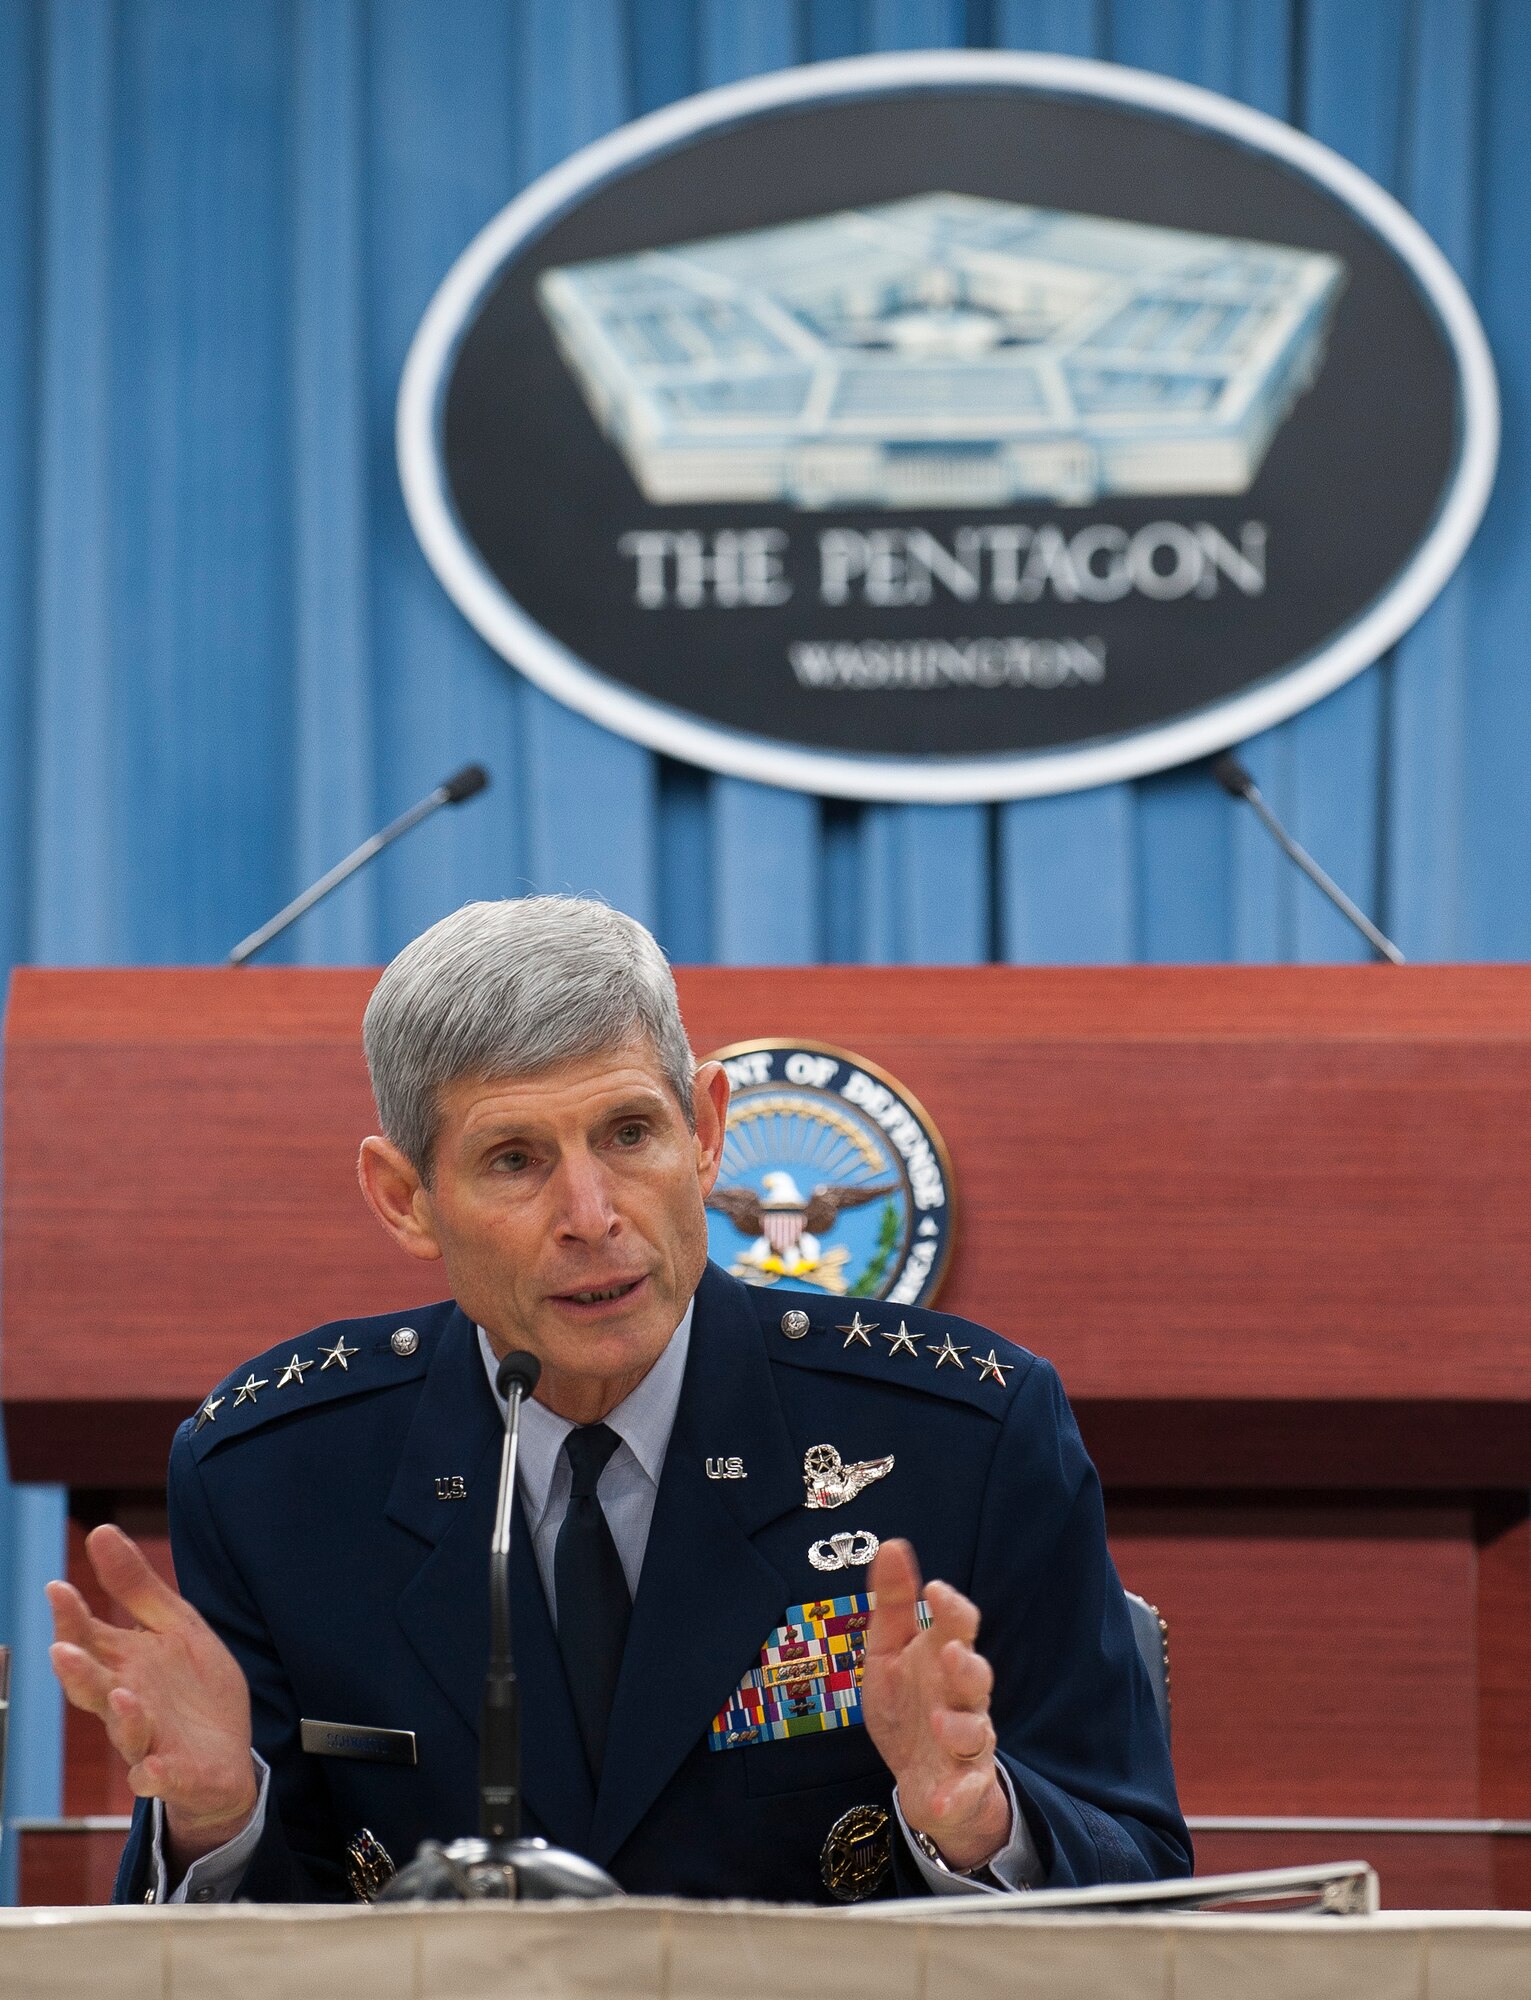 Air Force Chief of Staff Gen. Norton Schwartz responds to questions in the Pentagon on July 24, 2012,  to discuss Air Force accomplishments during his time as Chief of Staff. Schwartz also spoke about data indicating the cause of the F-22 Raptor's hypoxia-related incidents. (U.S. Air Force photo/James Varhegyi)